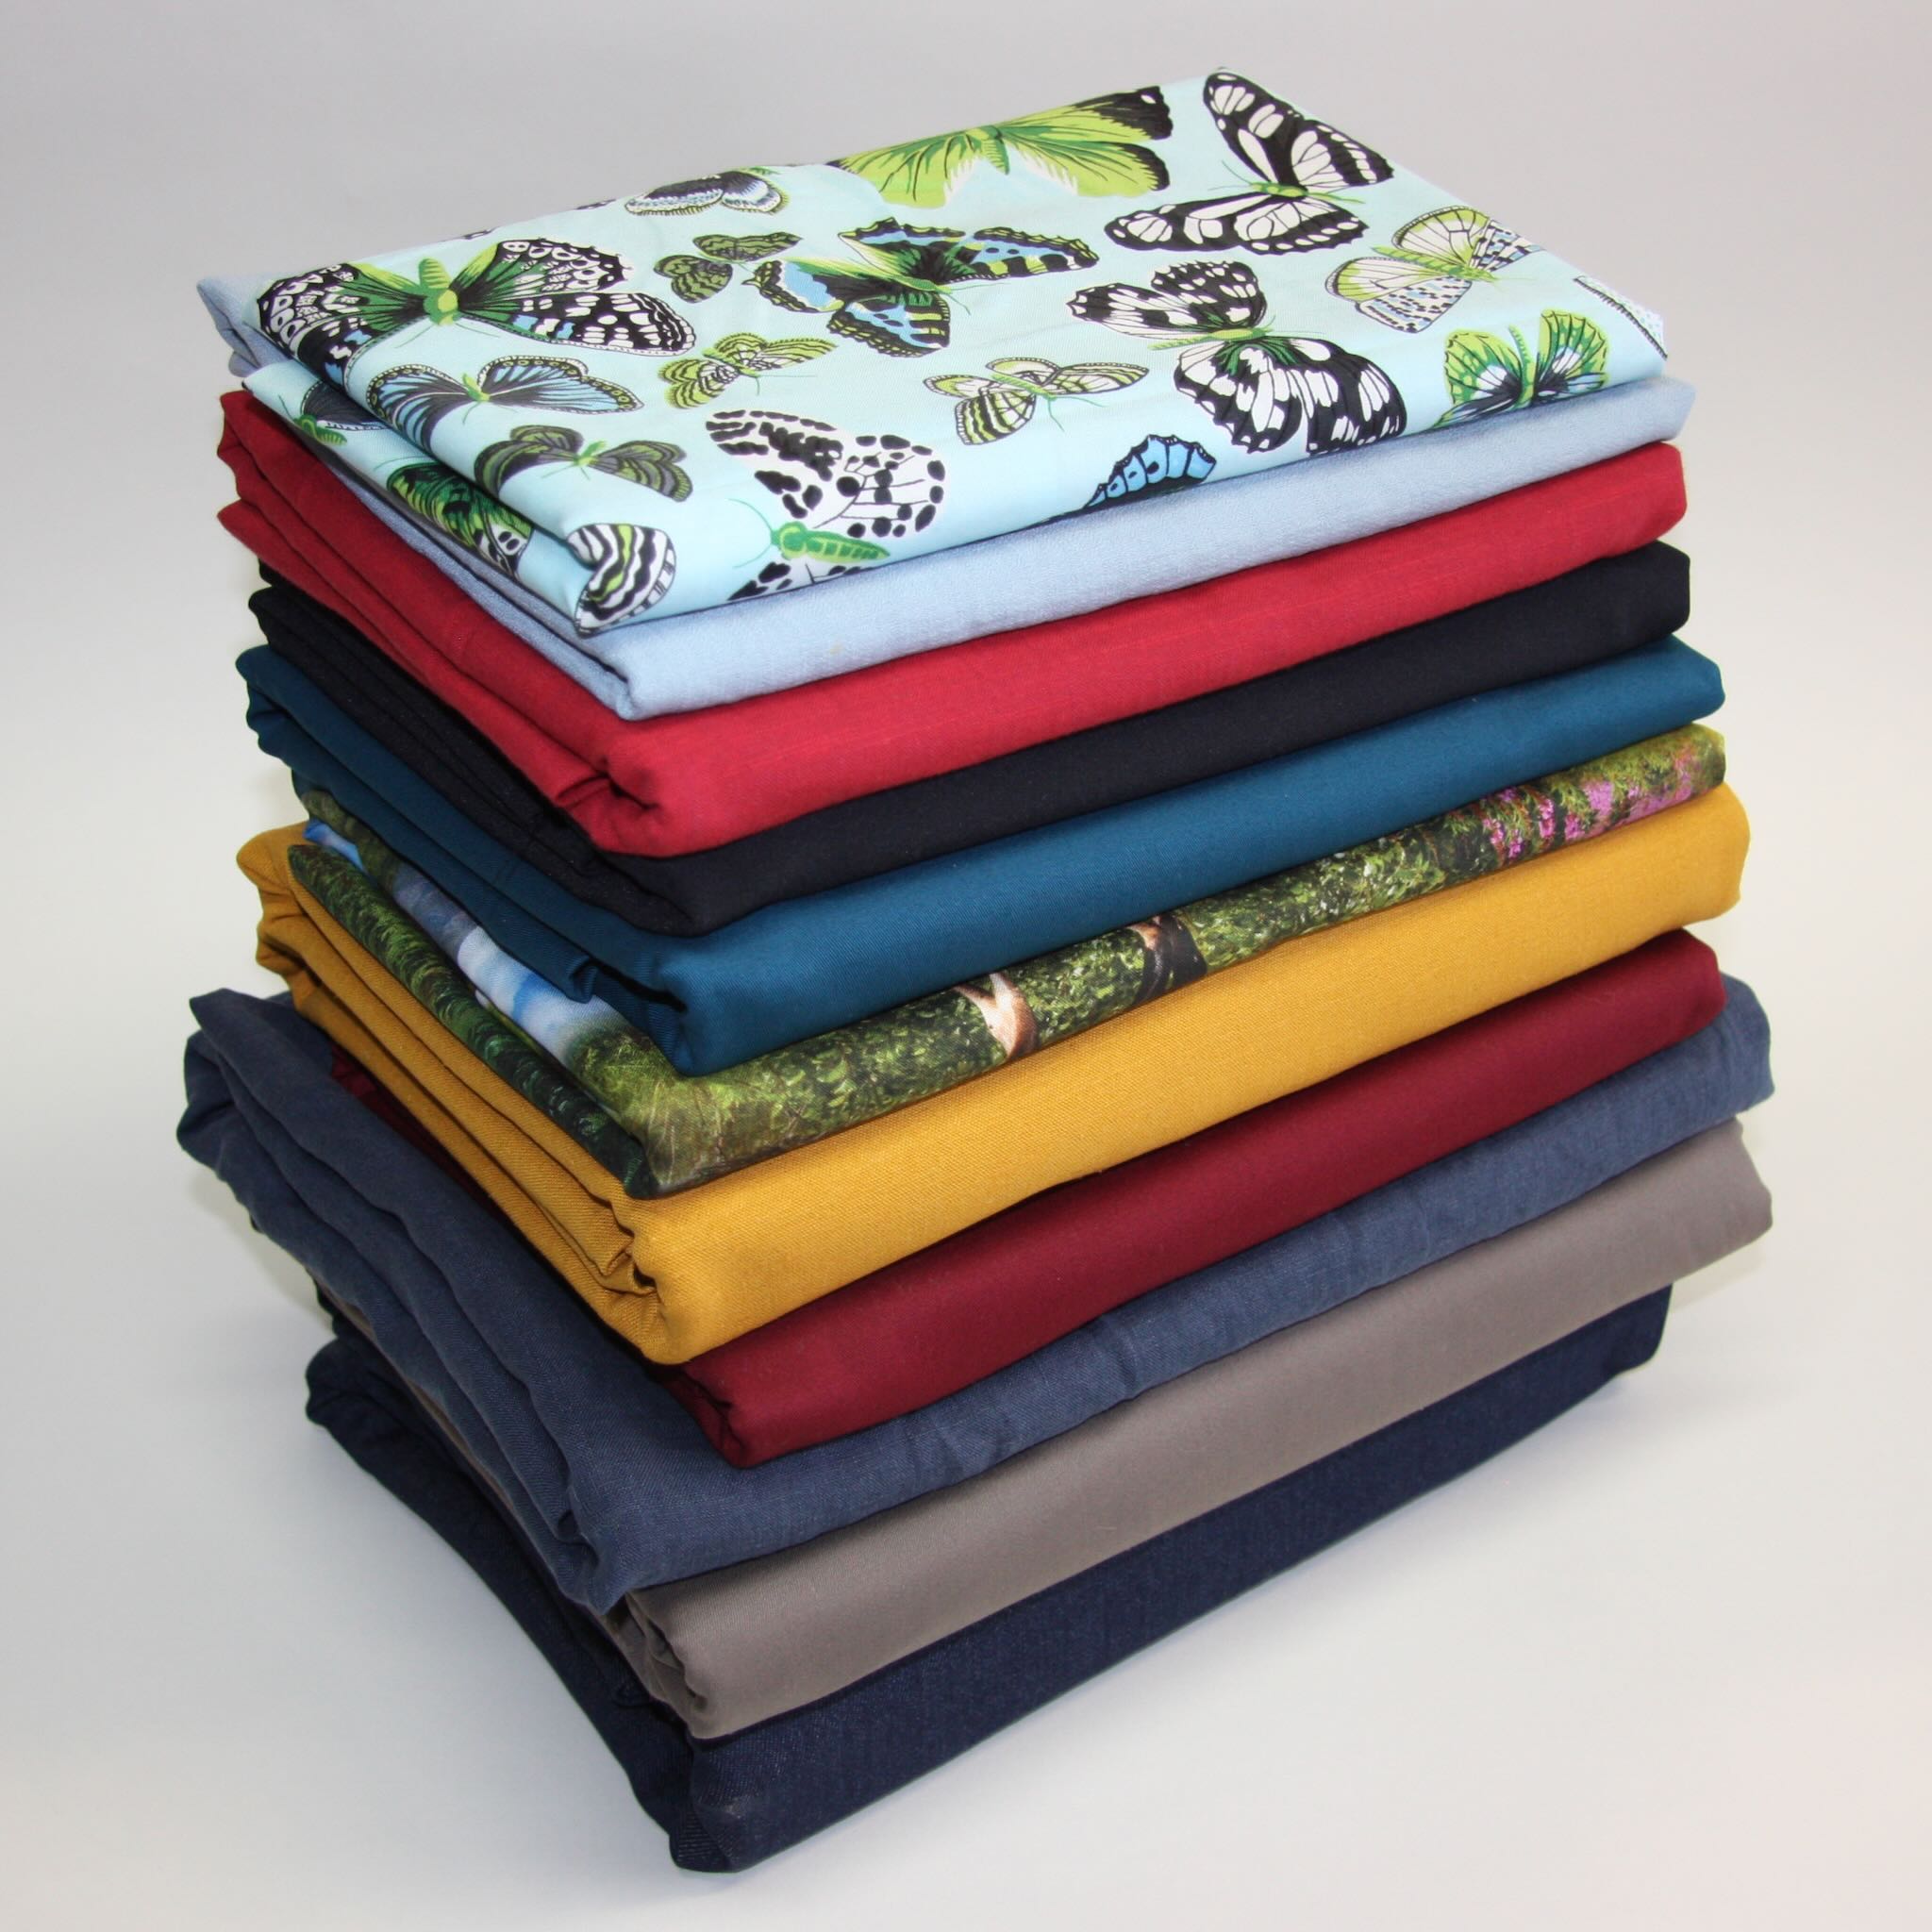 Day by day - Fabric Bundle